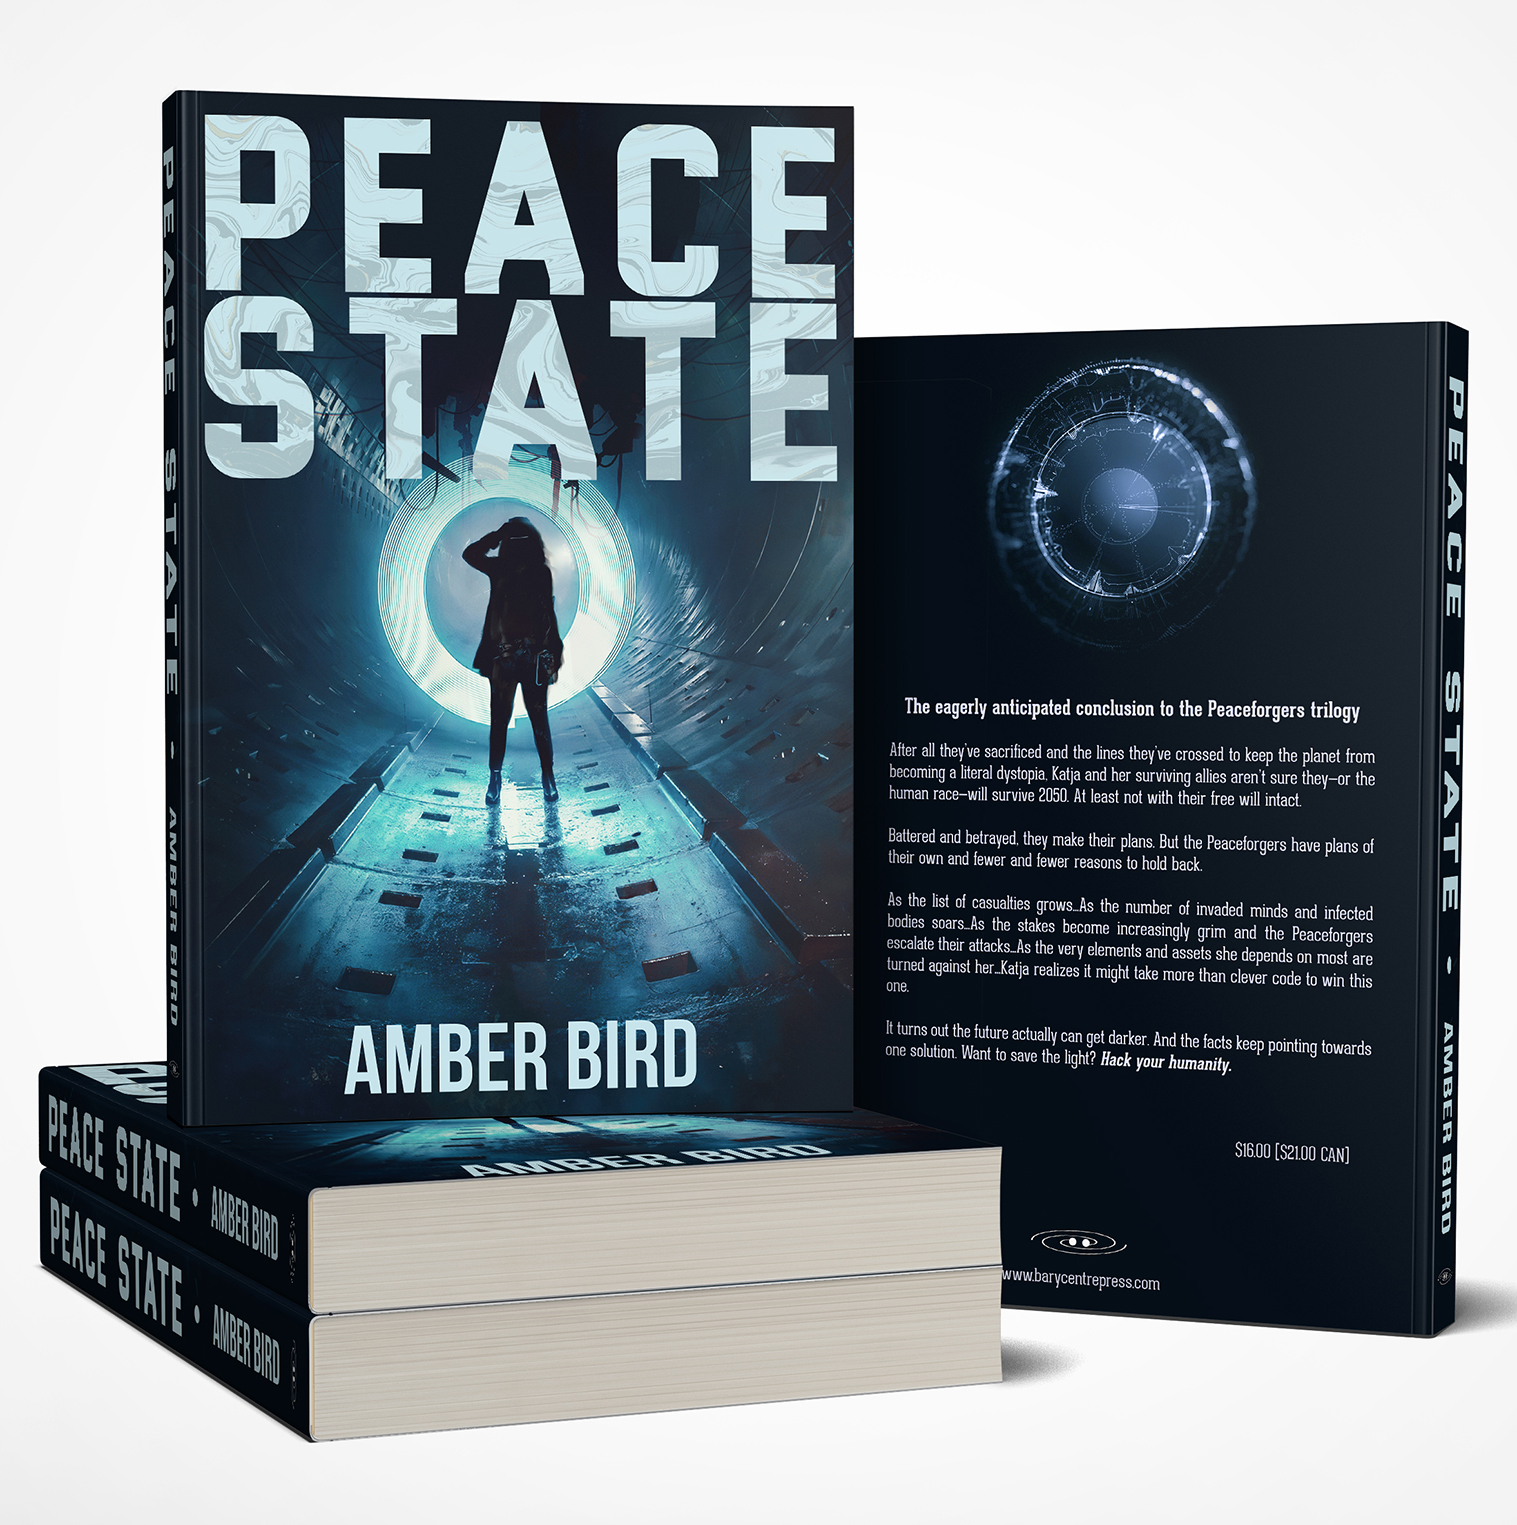 Copies of the book Peace State. Cover features a silhouette wearing a long jacket and boots stands in a metal tunnel, in front of concentric rings of blue-ish light and under an ominous machine with arms that can probe, cut, and inject